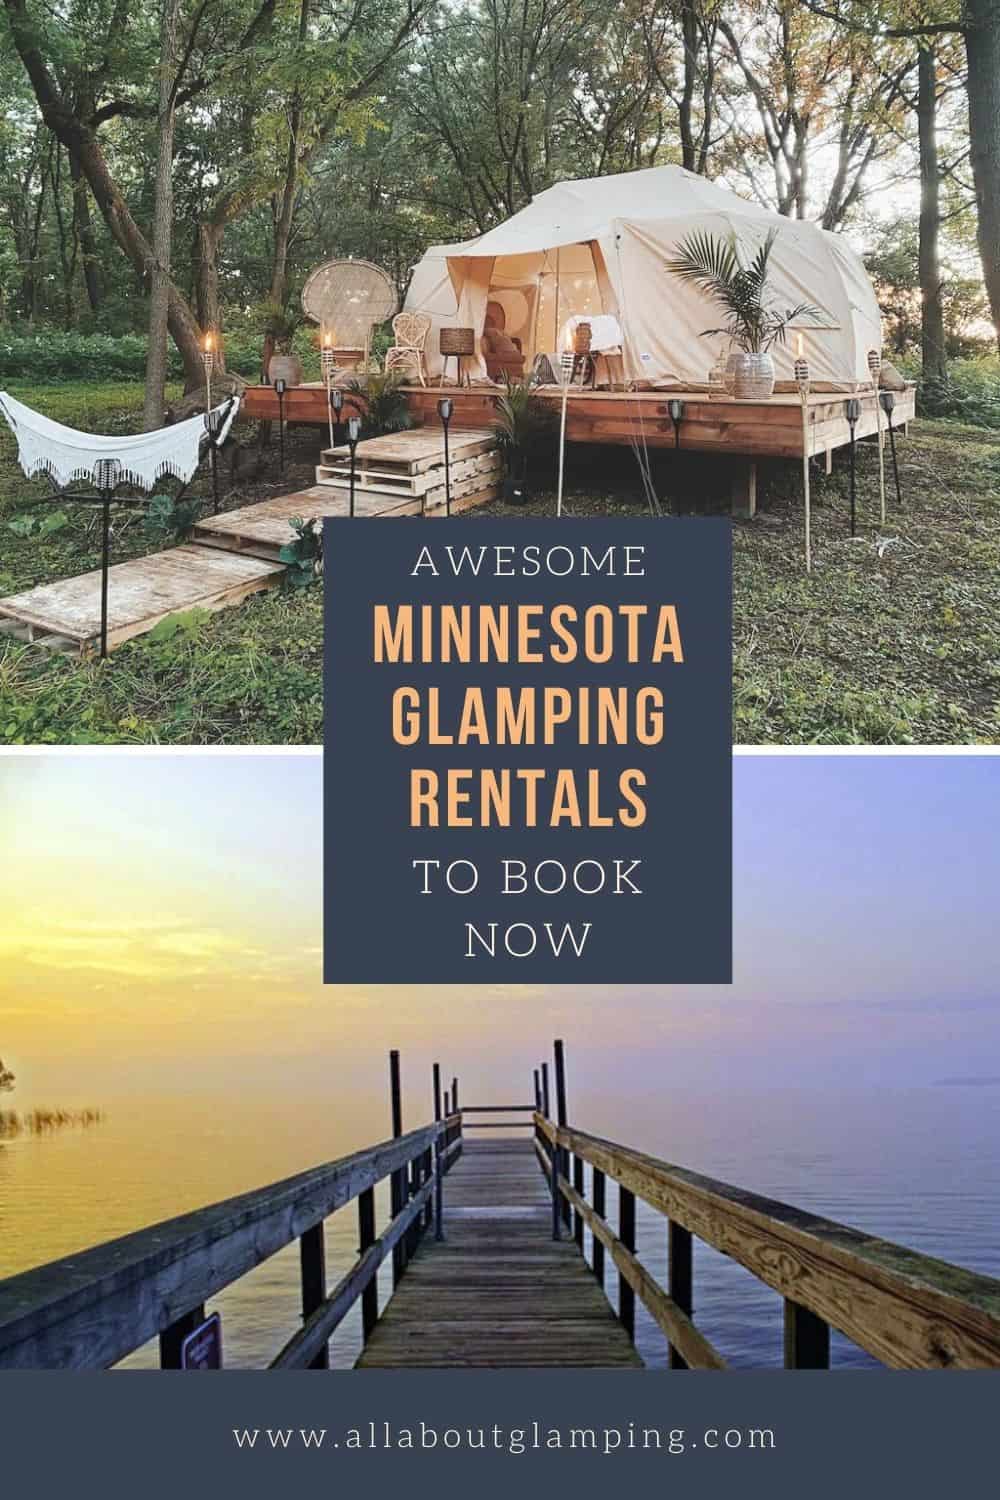 Minnesota Glamping is a great option when traveling in the Midwest. The land of a thousand lakes makes Glamping in Minnesota very popular!